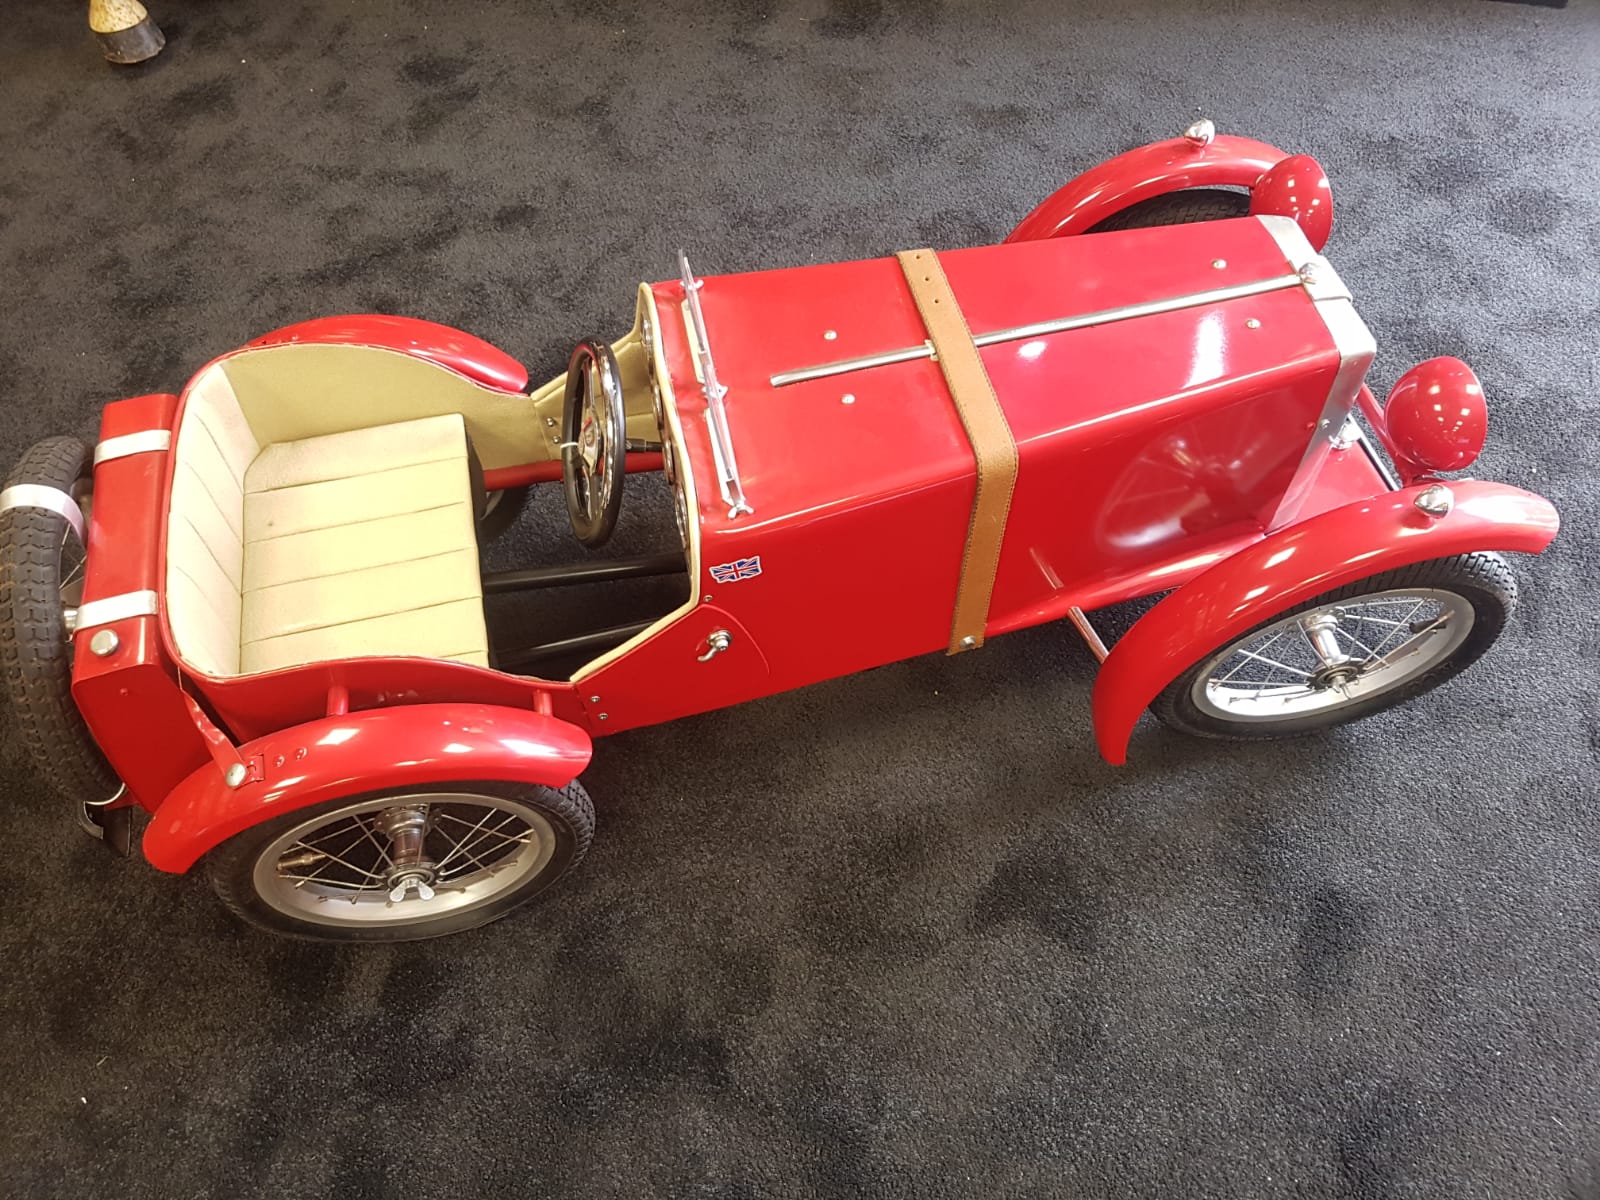 An MG, T C Pedal Car C1970s having highly detailed metal body. Measuring 115cm in length. - Image 3 of 3